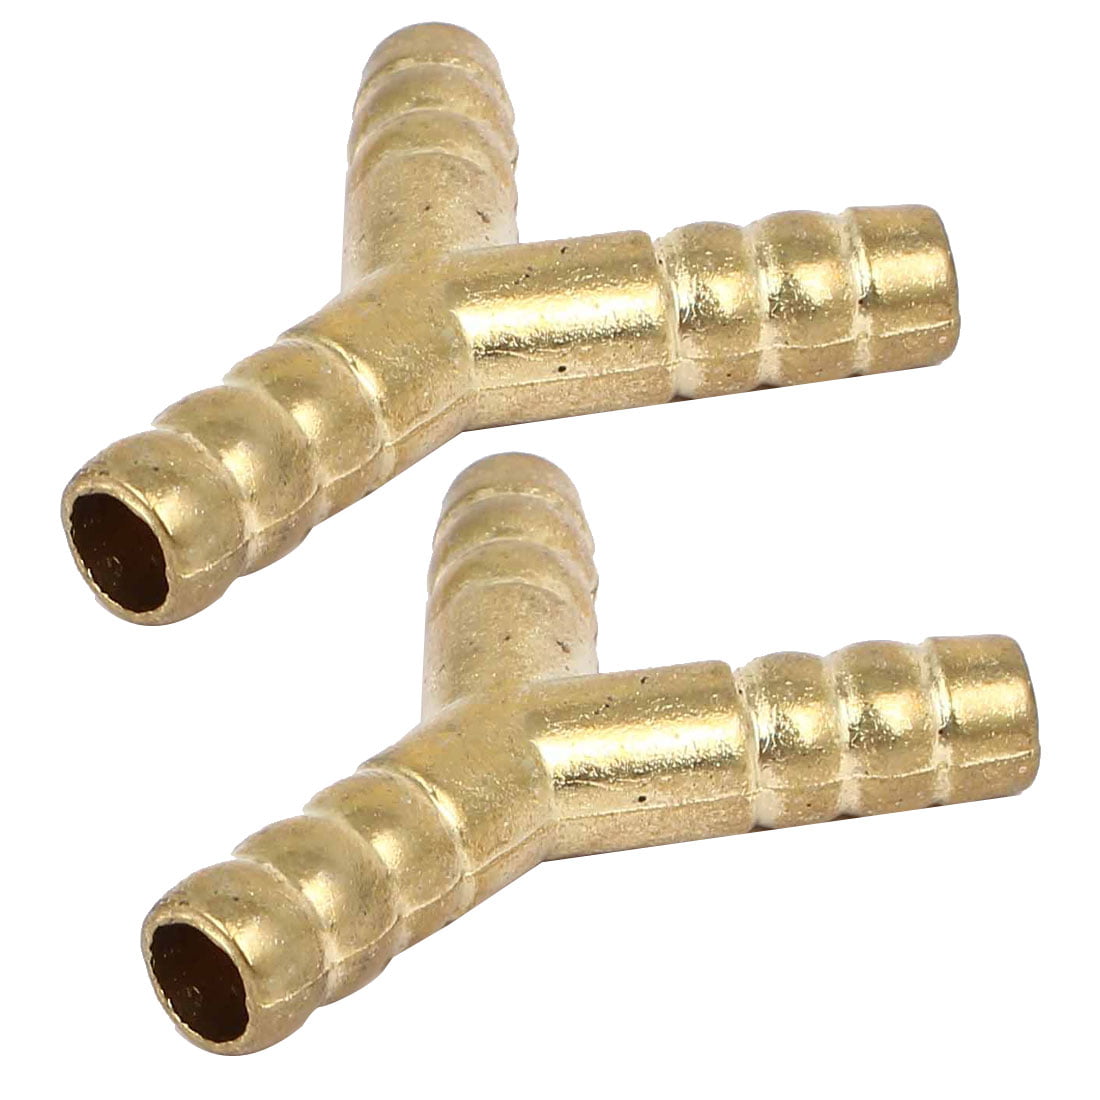 Hardware Accessories Xuulan Xianglaa-Water Pipe Connector Color : Inside 1 8 T Shape 3 Way Hose Barb 1/8 1/4 3/8 1/2 Copper Barbed Connector Brass Splicer Pipe Joint Fitting 